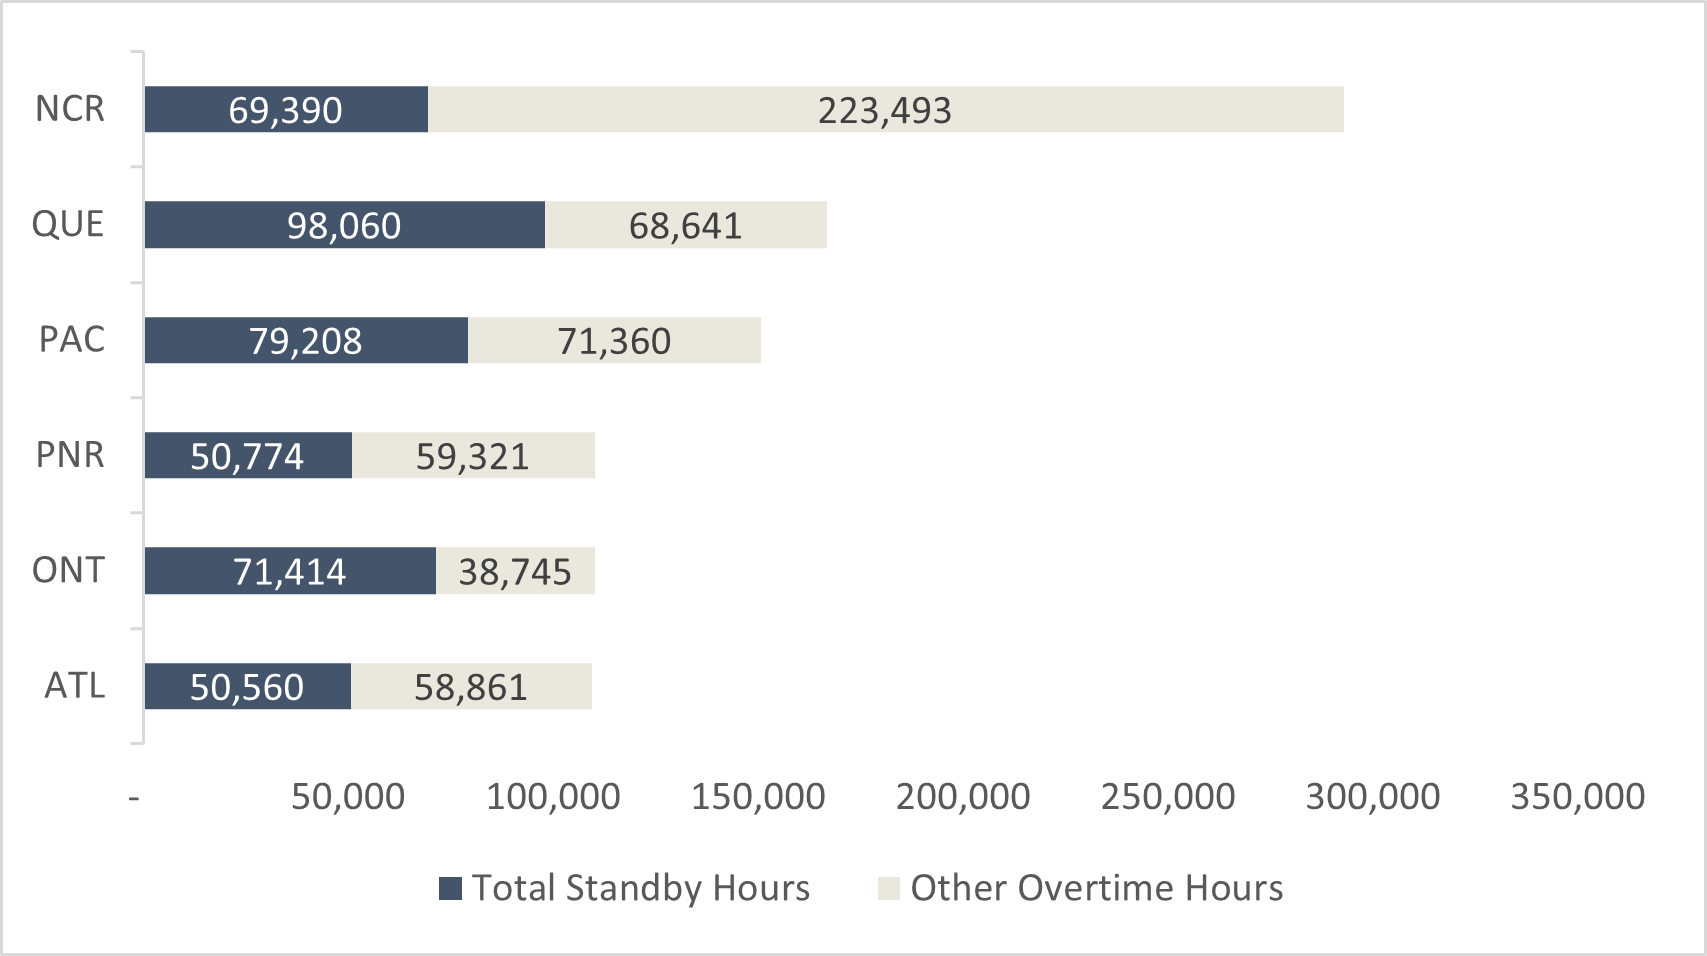 The bar graph displays the total standby hours compared to other overtime hours in the Safety and Security group between fiscal years 2017-18 and 2019-20, broken down by TC’s six regions. The NCR has the highest amount of other overtime at 223,493 hours compared to 69,390 total standby overtime hours. QUE region follows with 98,060 standby overtime hours compared to 68,641 other overtime hours, followed by PAC with 79,208 standby overtime hours compared to 71,360 other overtime hours, PNR with 50,774 standby overtime hours compared to 59,321 other overtime hours, ONT with 71,414 standby overtime hours compared to 38,745 other overtime hours, and ATL with 50,560 standby overtime hours compared to 58,861 other overtime hours.